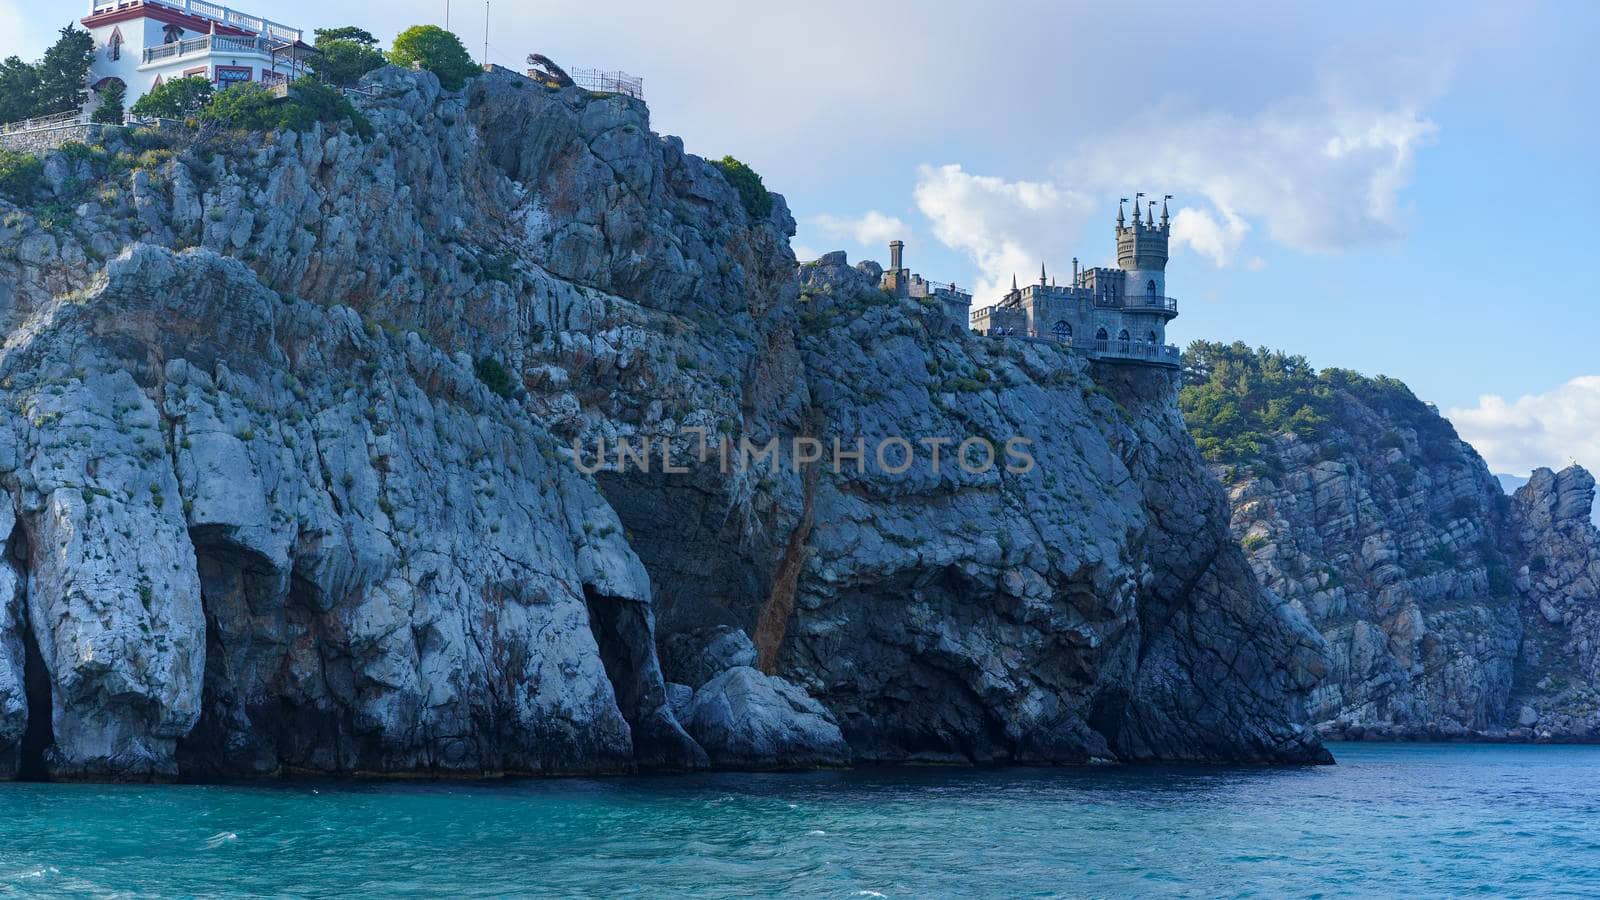 View of the Yalta coastline with a Swallow's nest